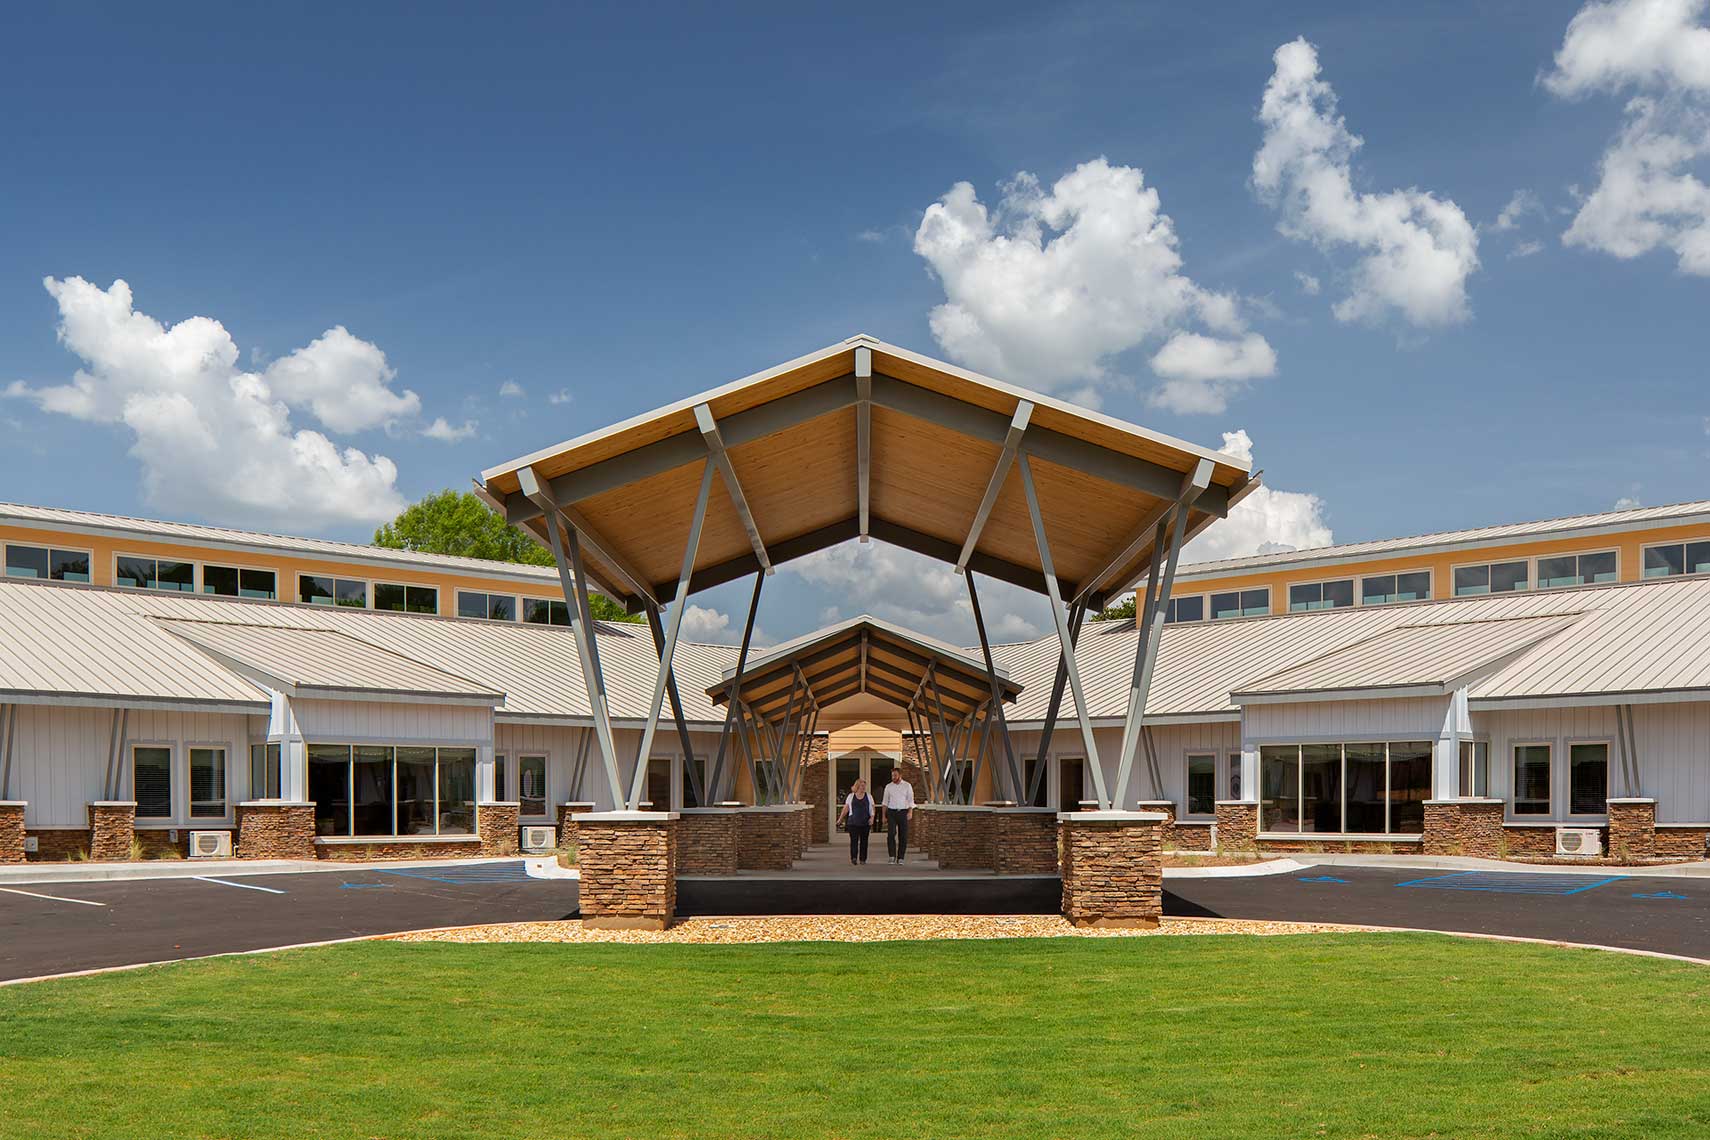 A symmetrical view of the canopy and building at Magnolia Manor Senior Living Community